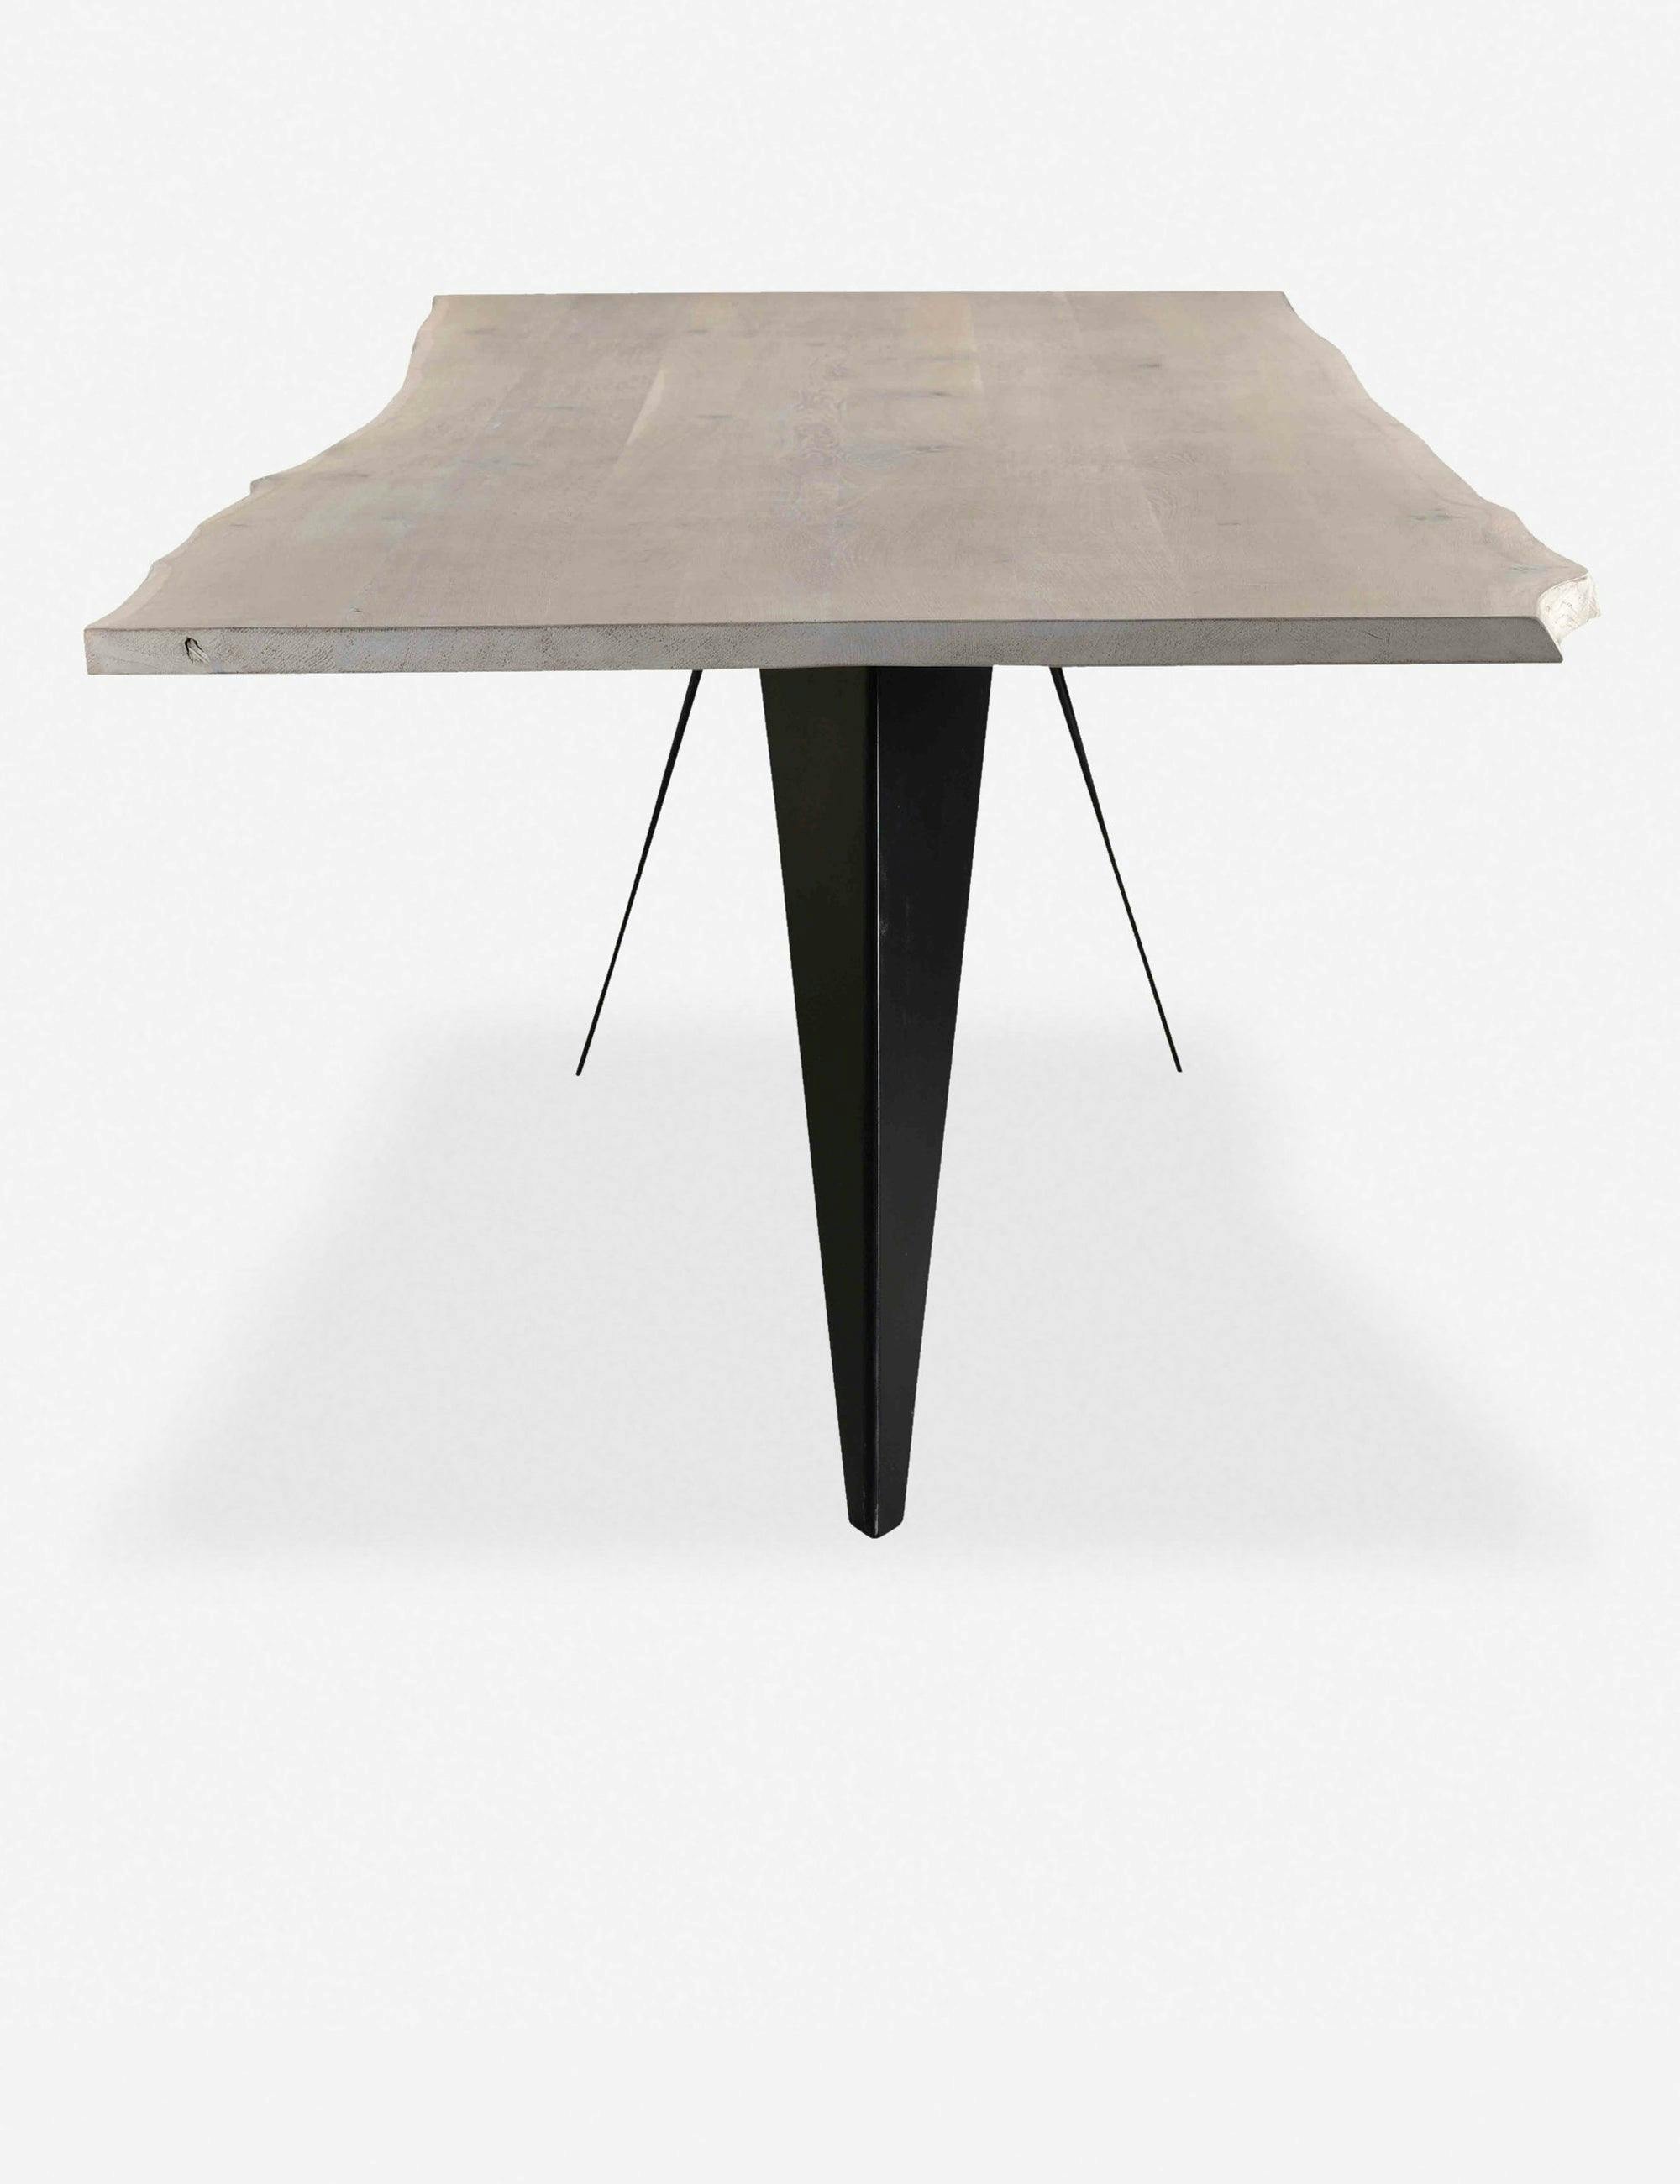 Contemporary Black and Gray Solid Oak Dining Table with Iron Base